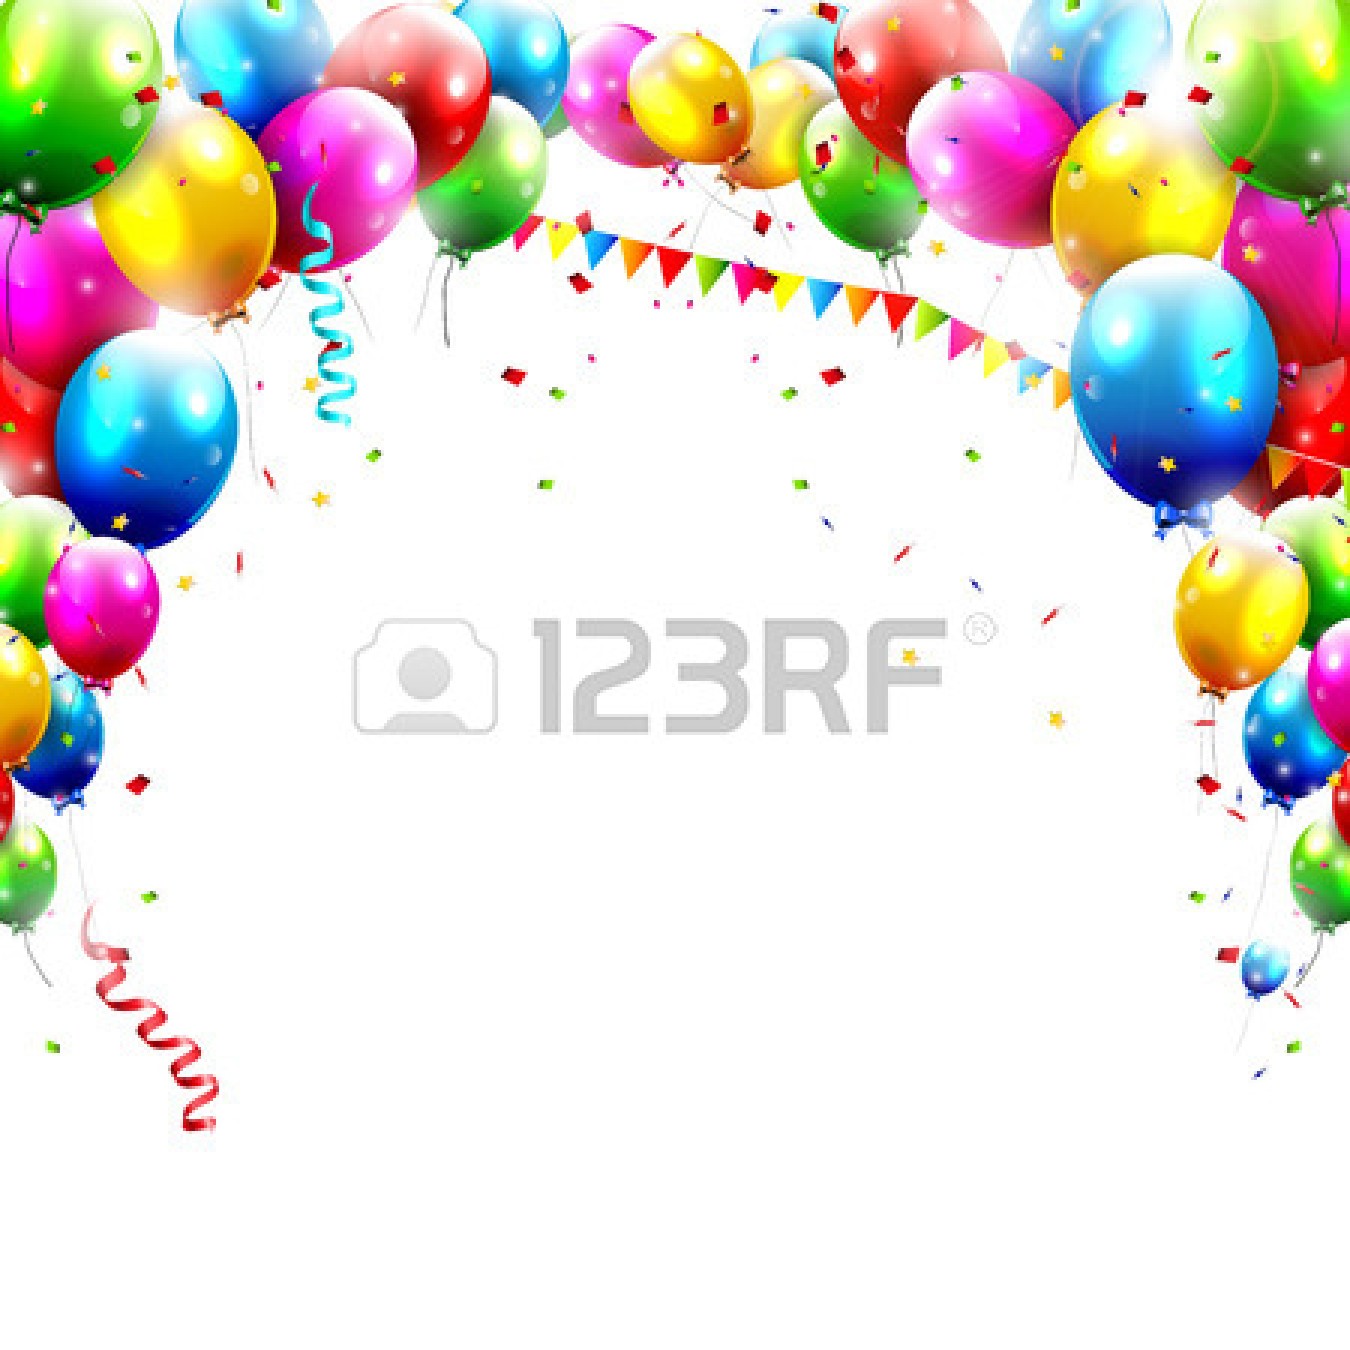 Free Birthday Clipart Cousin Brucie Birthday Stock Photos Images    